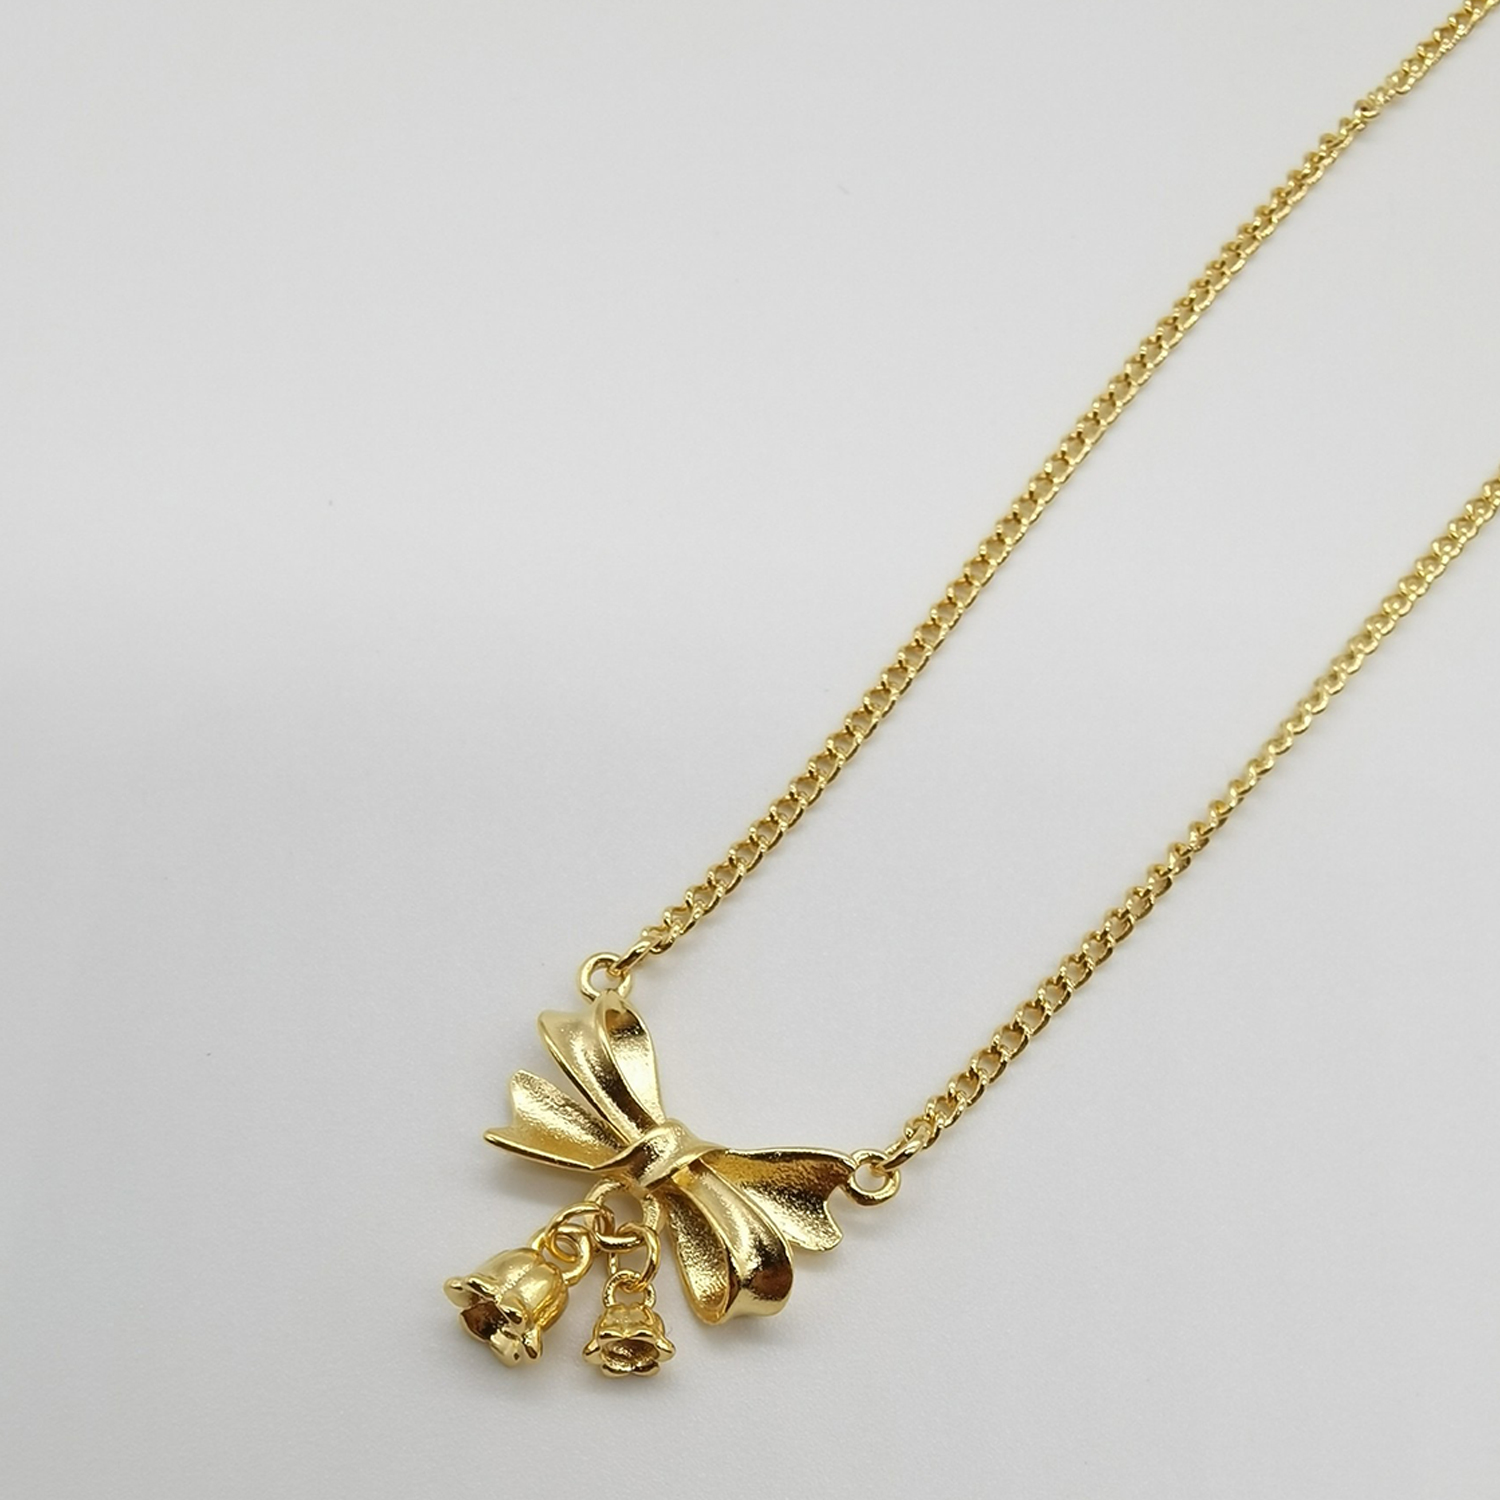 Alluvial gold vacuum electroplating 24K gold lily of the valley bow necklace